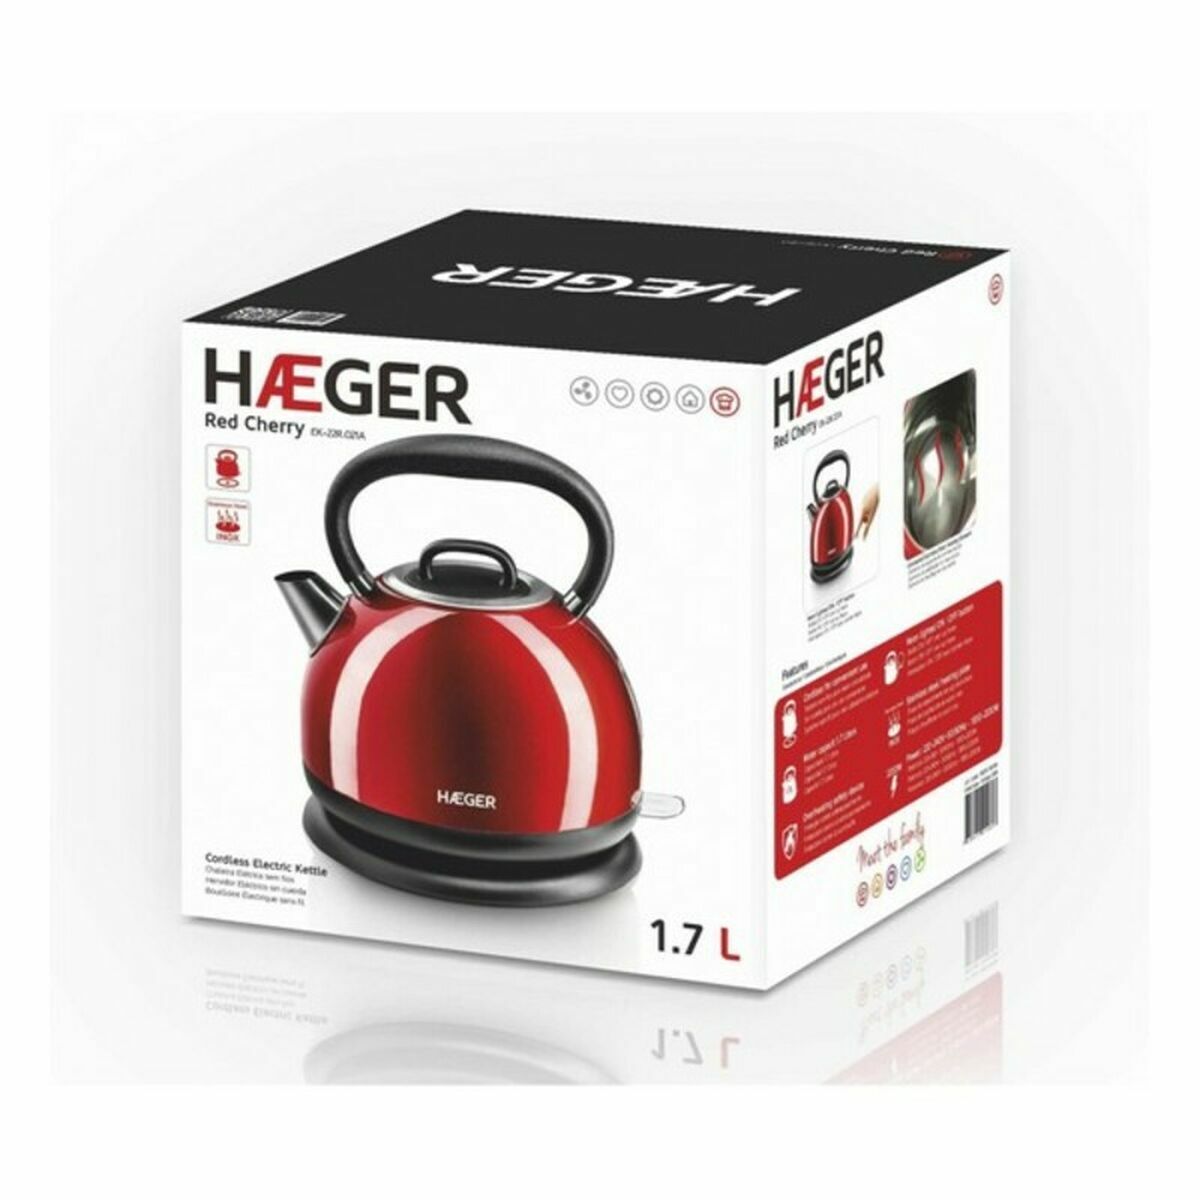 Water Kettle and Electric Teakettle Haeger EK-22R.021A Red Stainless steel 2200 W 1,7 L